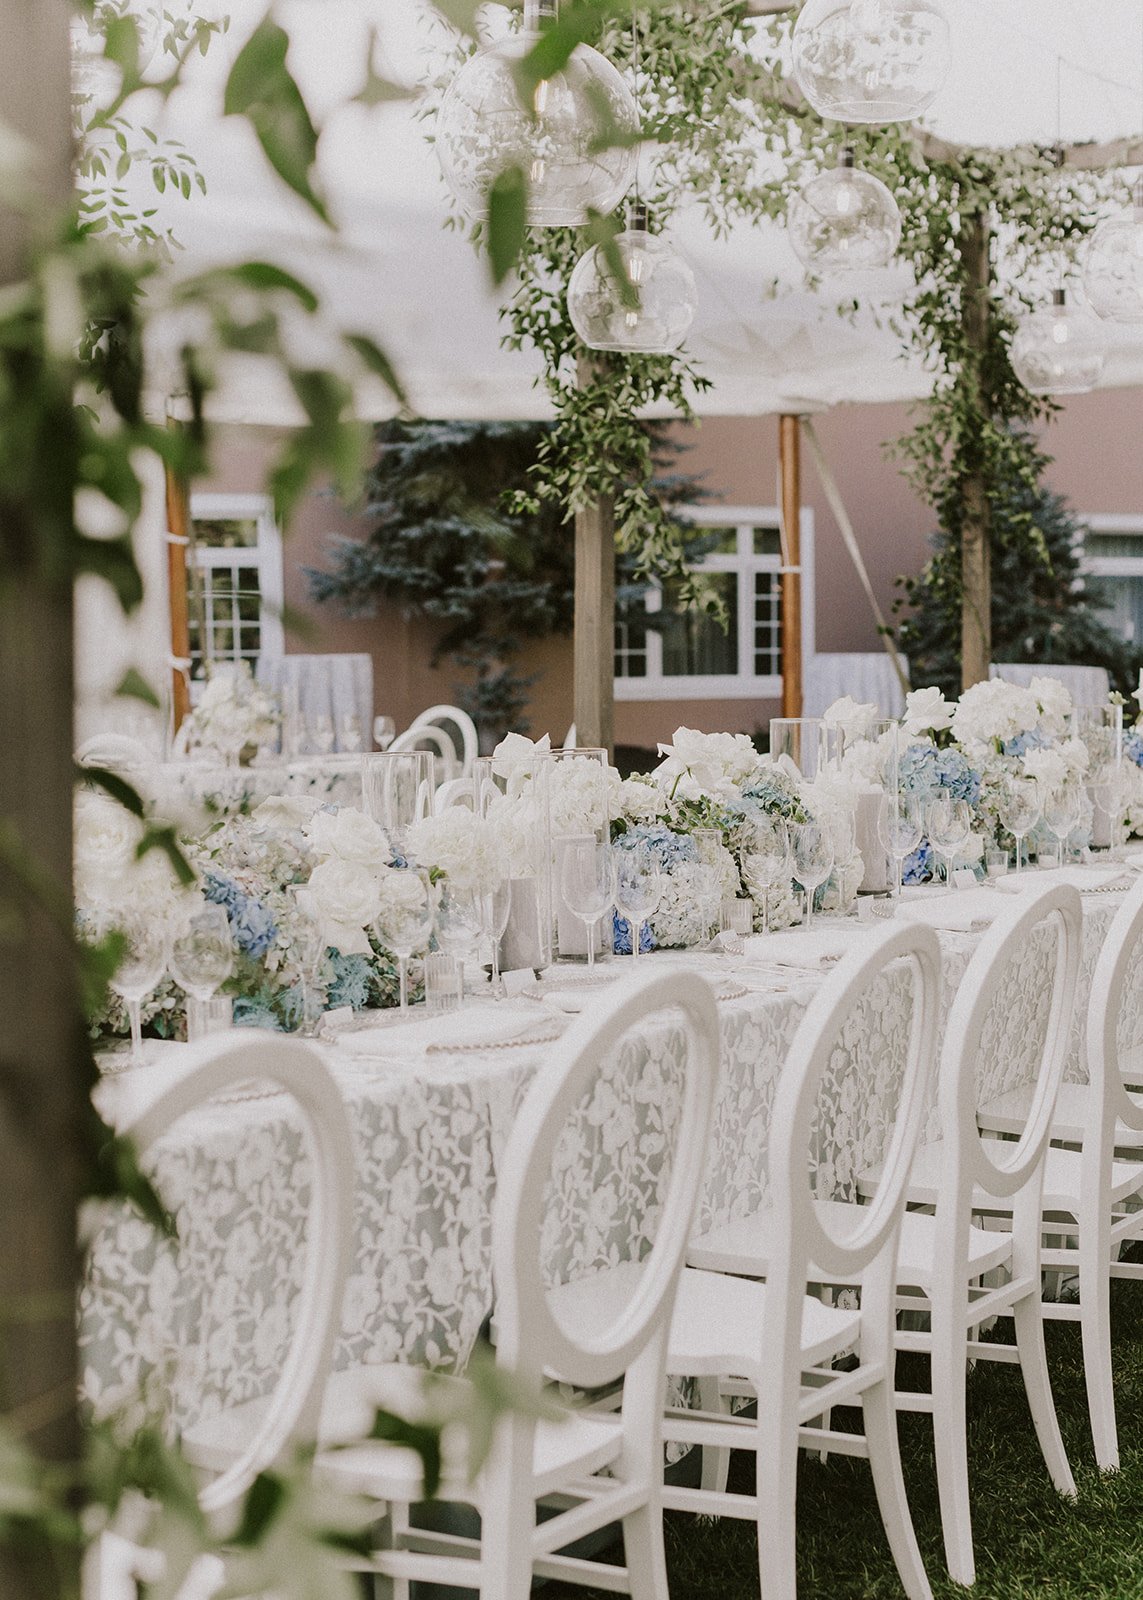  details receptions tables white and blue florals 